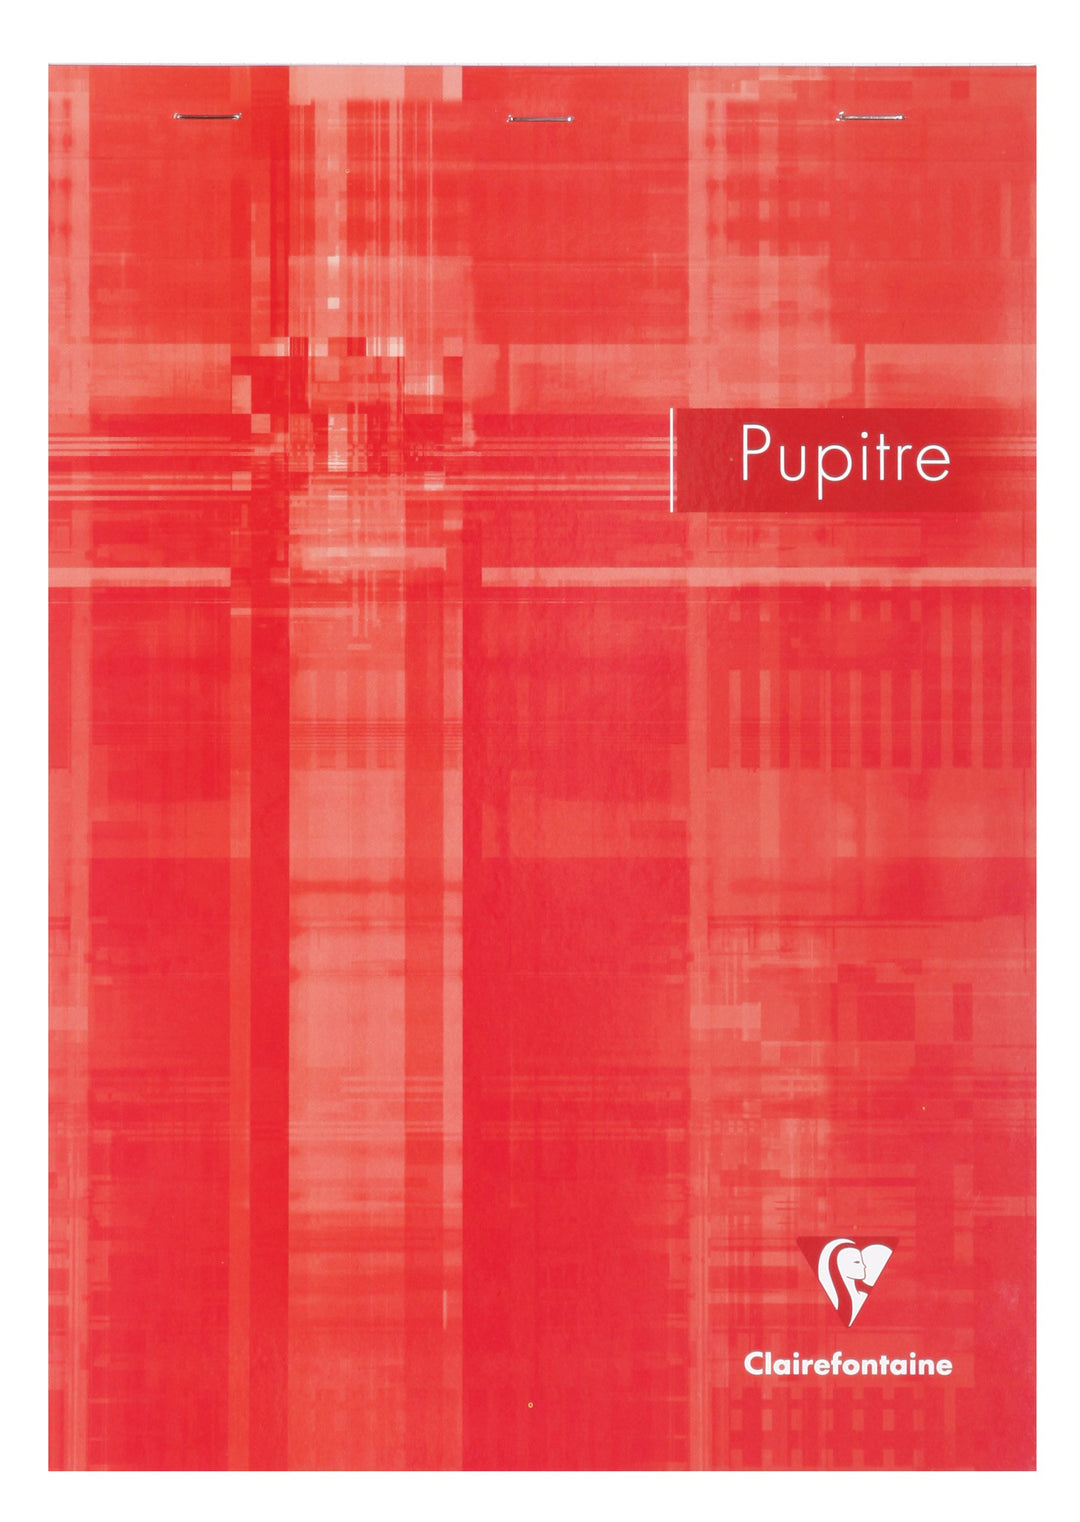 Clairefontaine Pupitre Stapled Square Ruled Notepad - A4